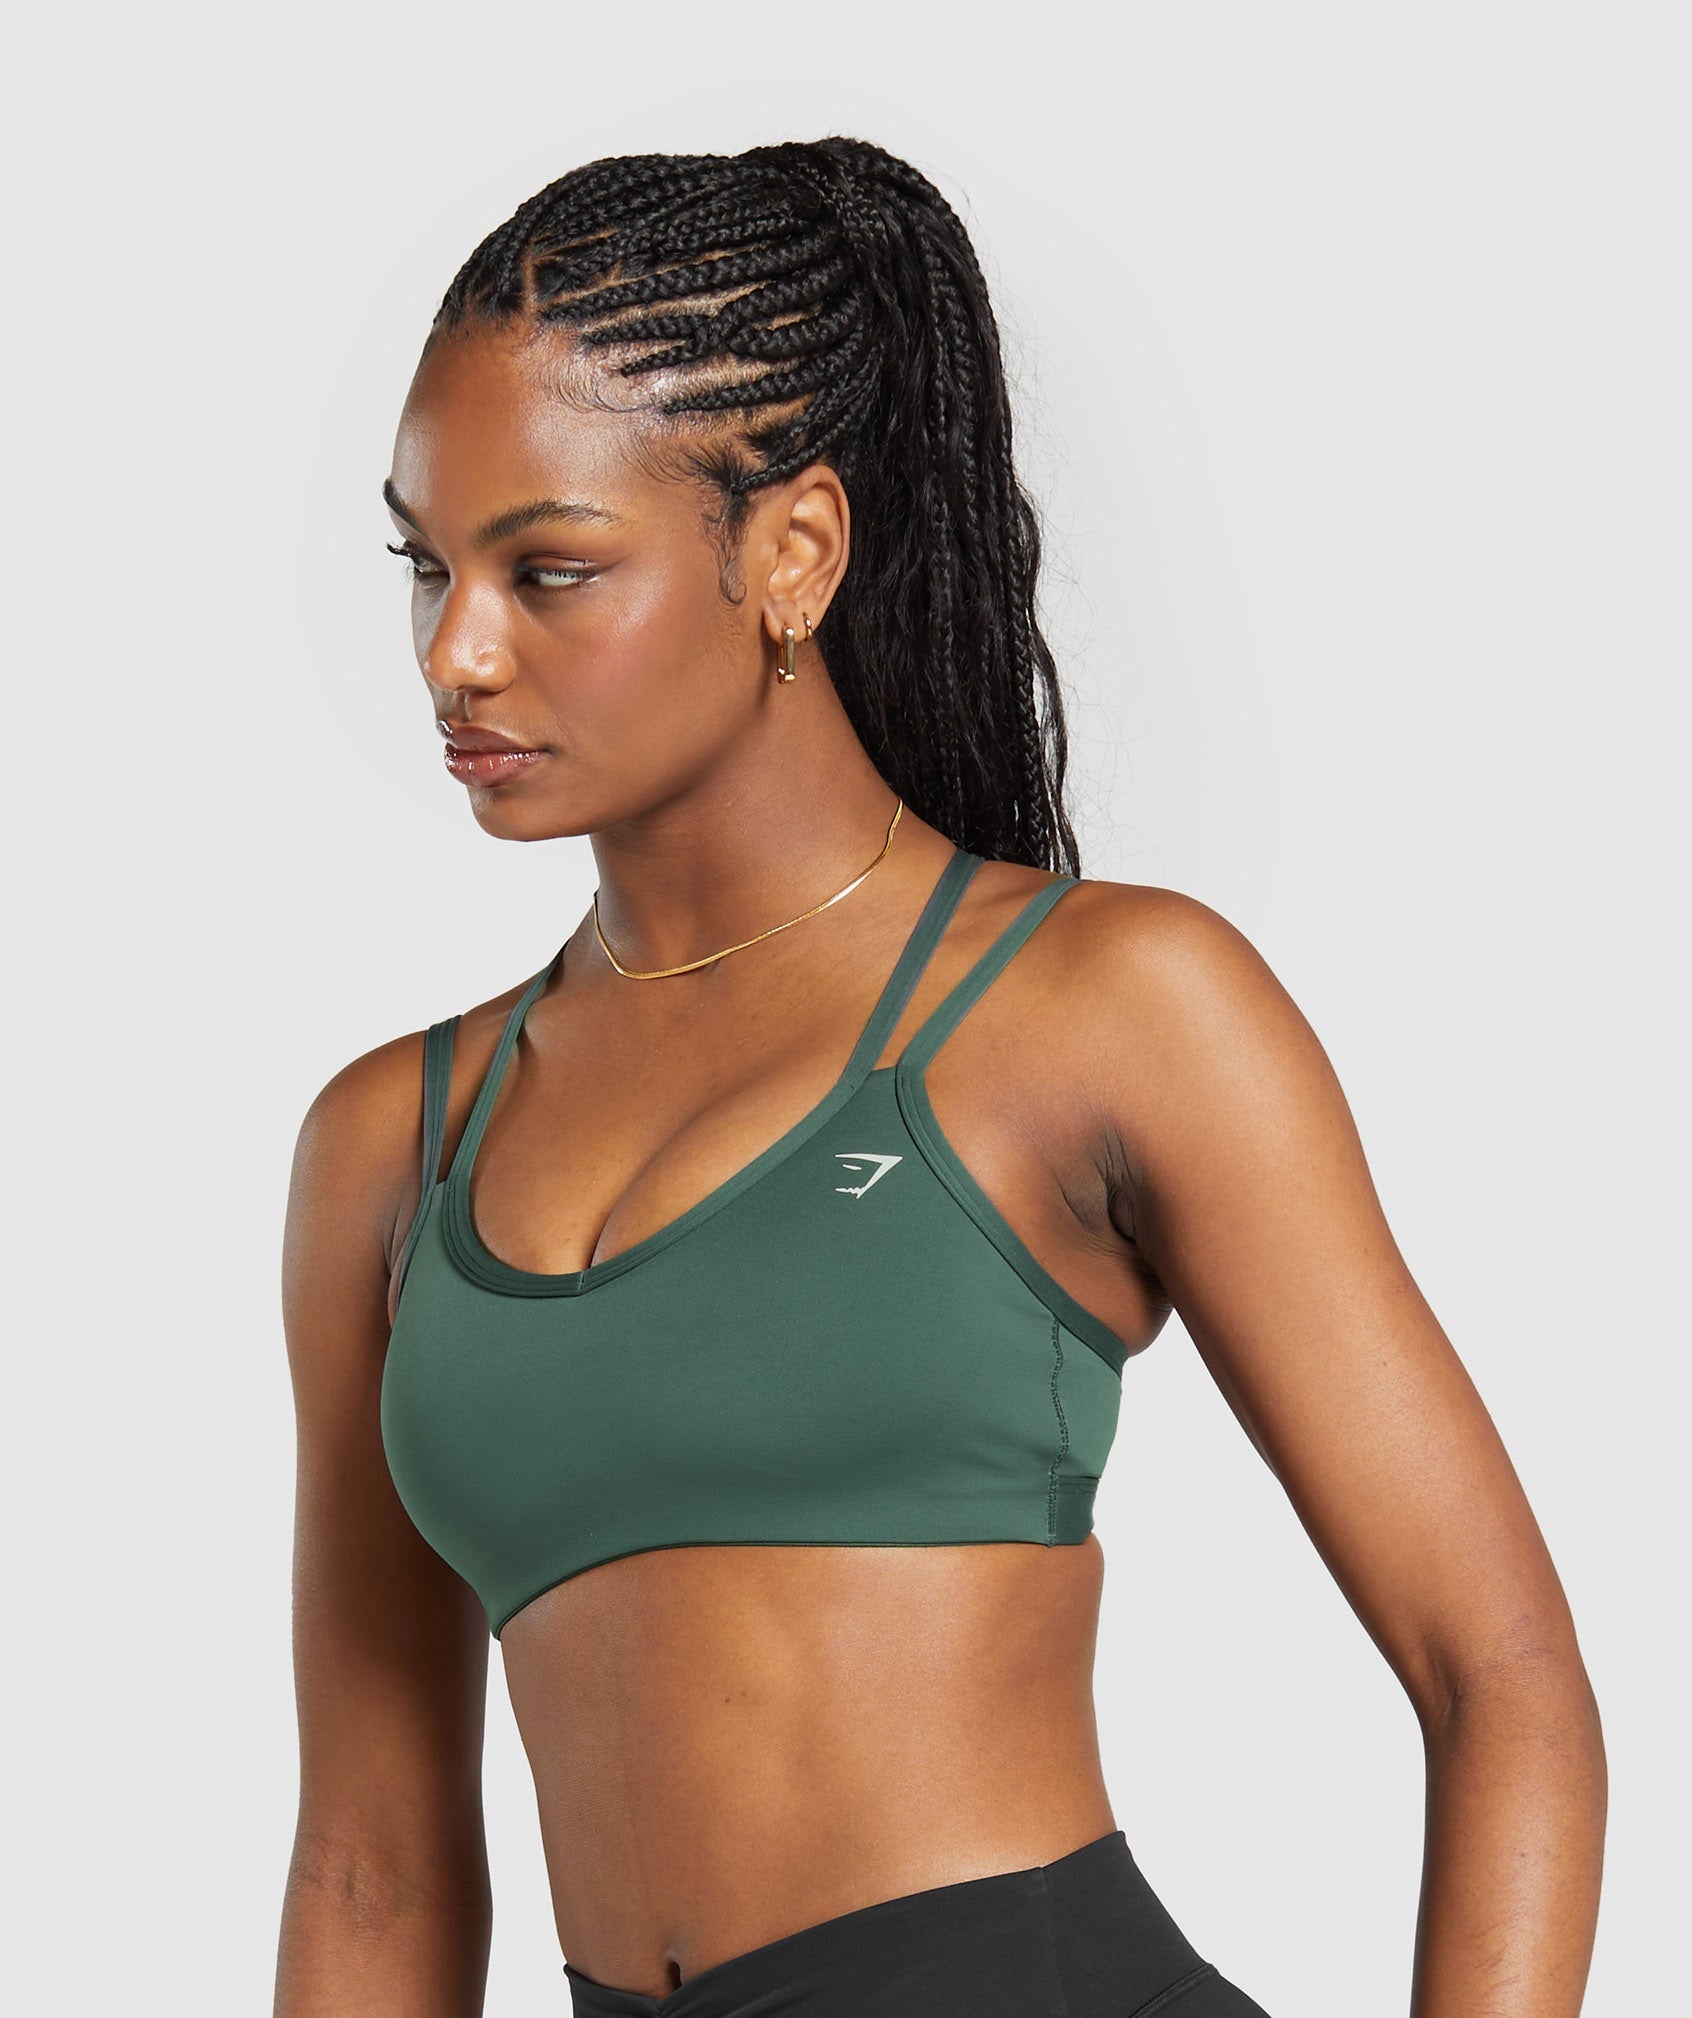 Strap Feature Sports Bra in Slate Teal - view 3